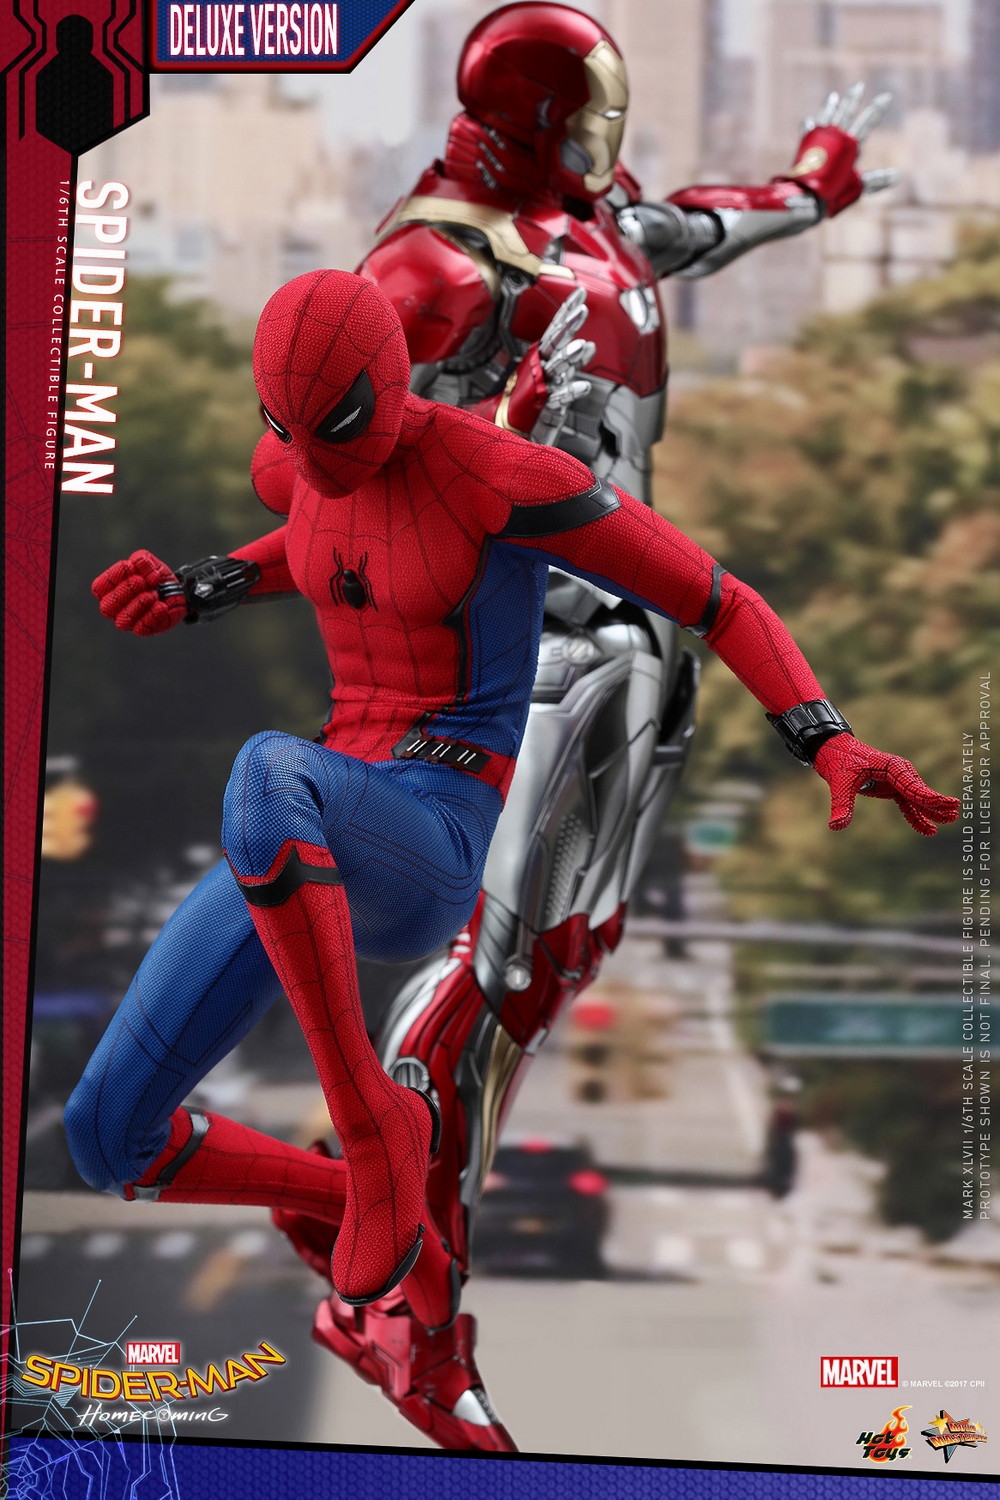 Hot-Toys-MMS426-Spider-Man-Homecoming-Deluxe-014.jpg